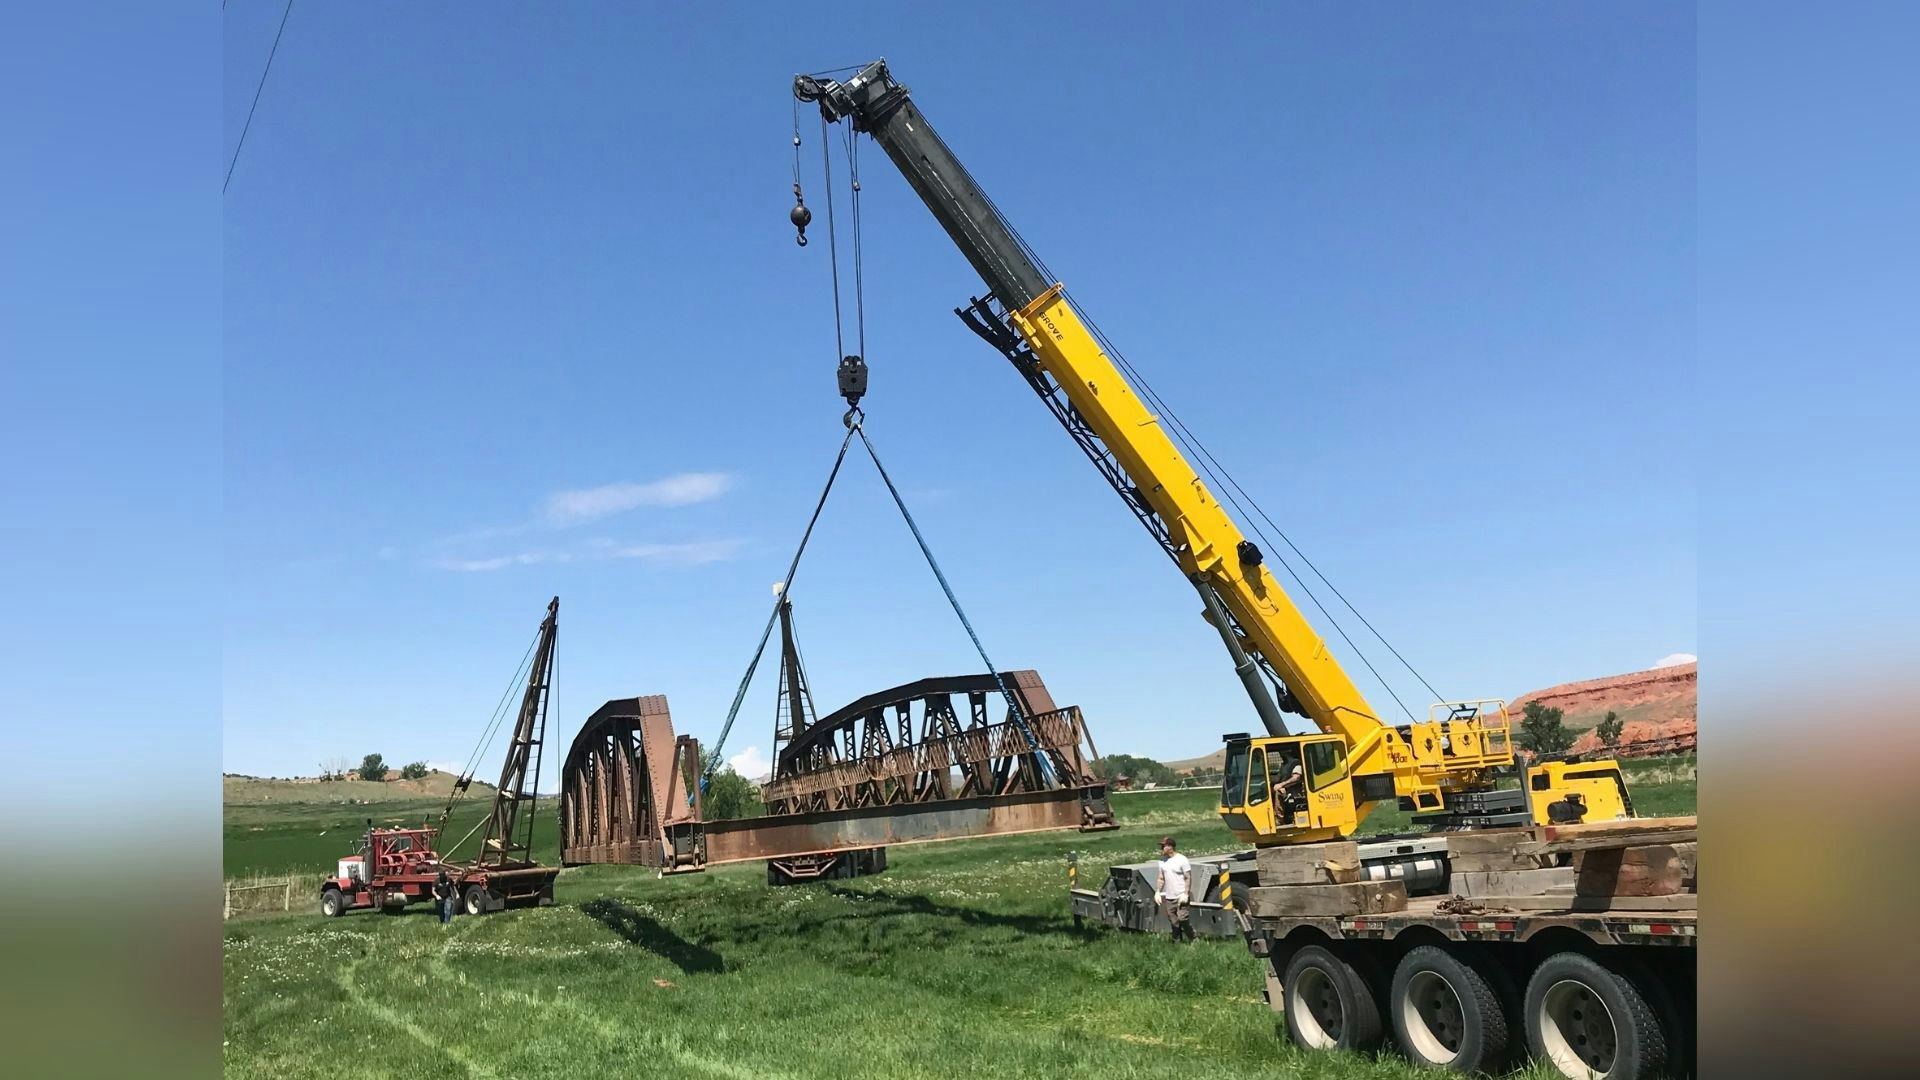 Keith and Laura Galloway, owners of the Galloway Ranch north of Ten Sleep, Wyoming, bought this 80,000-pound bridge from Washakie County for $1,100. It will be used to connect parts of their ranch with their son's property.